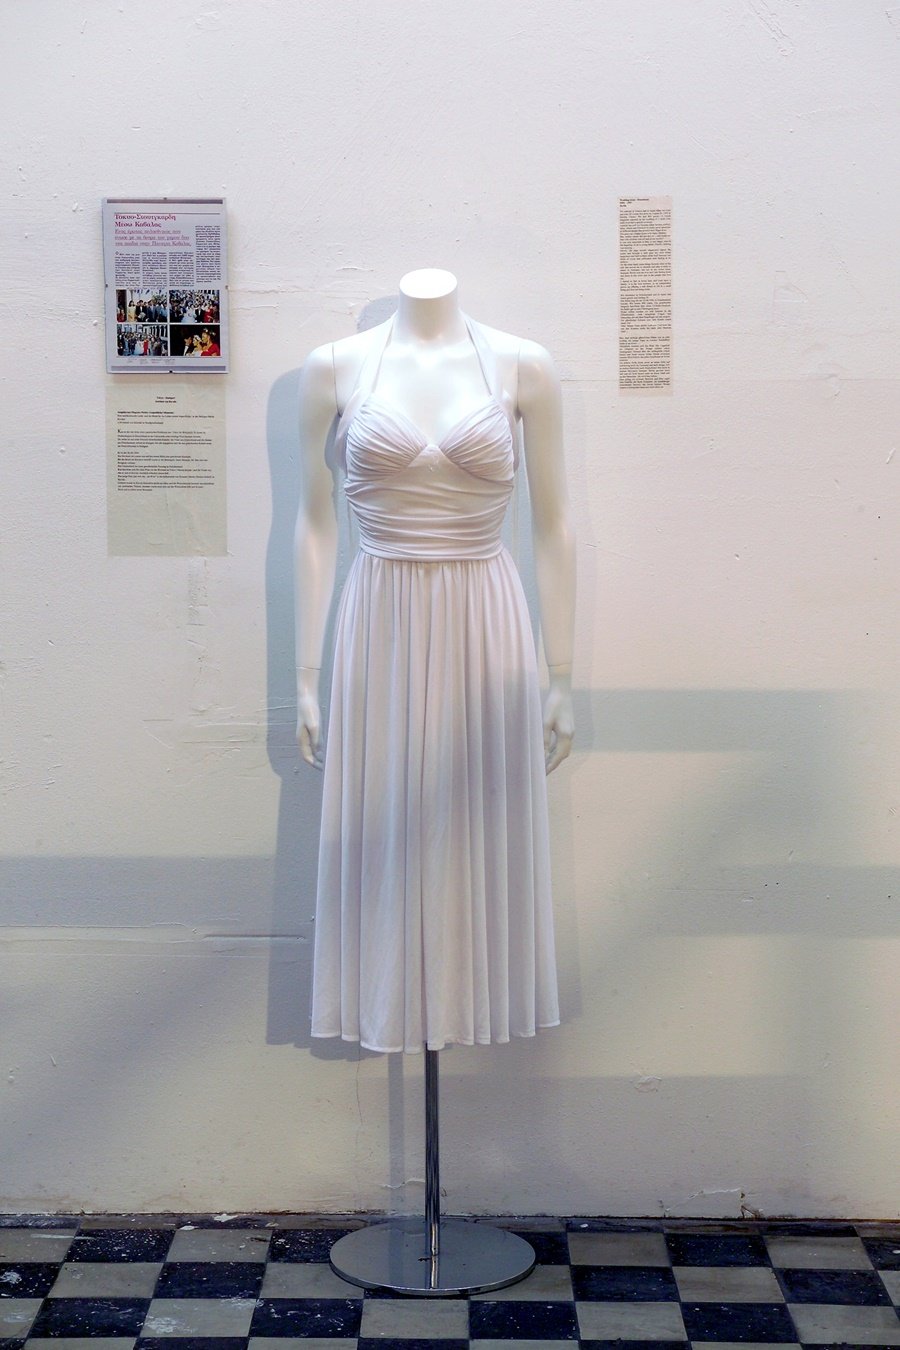 A wedding dress. Photo courtesy Museum of Broken Relationships.